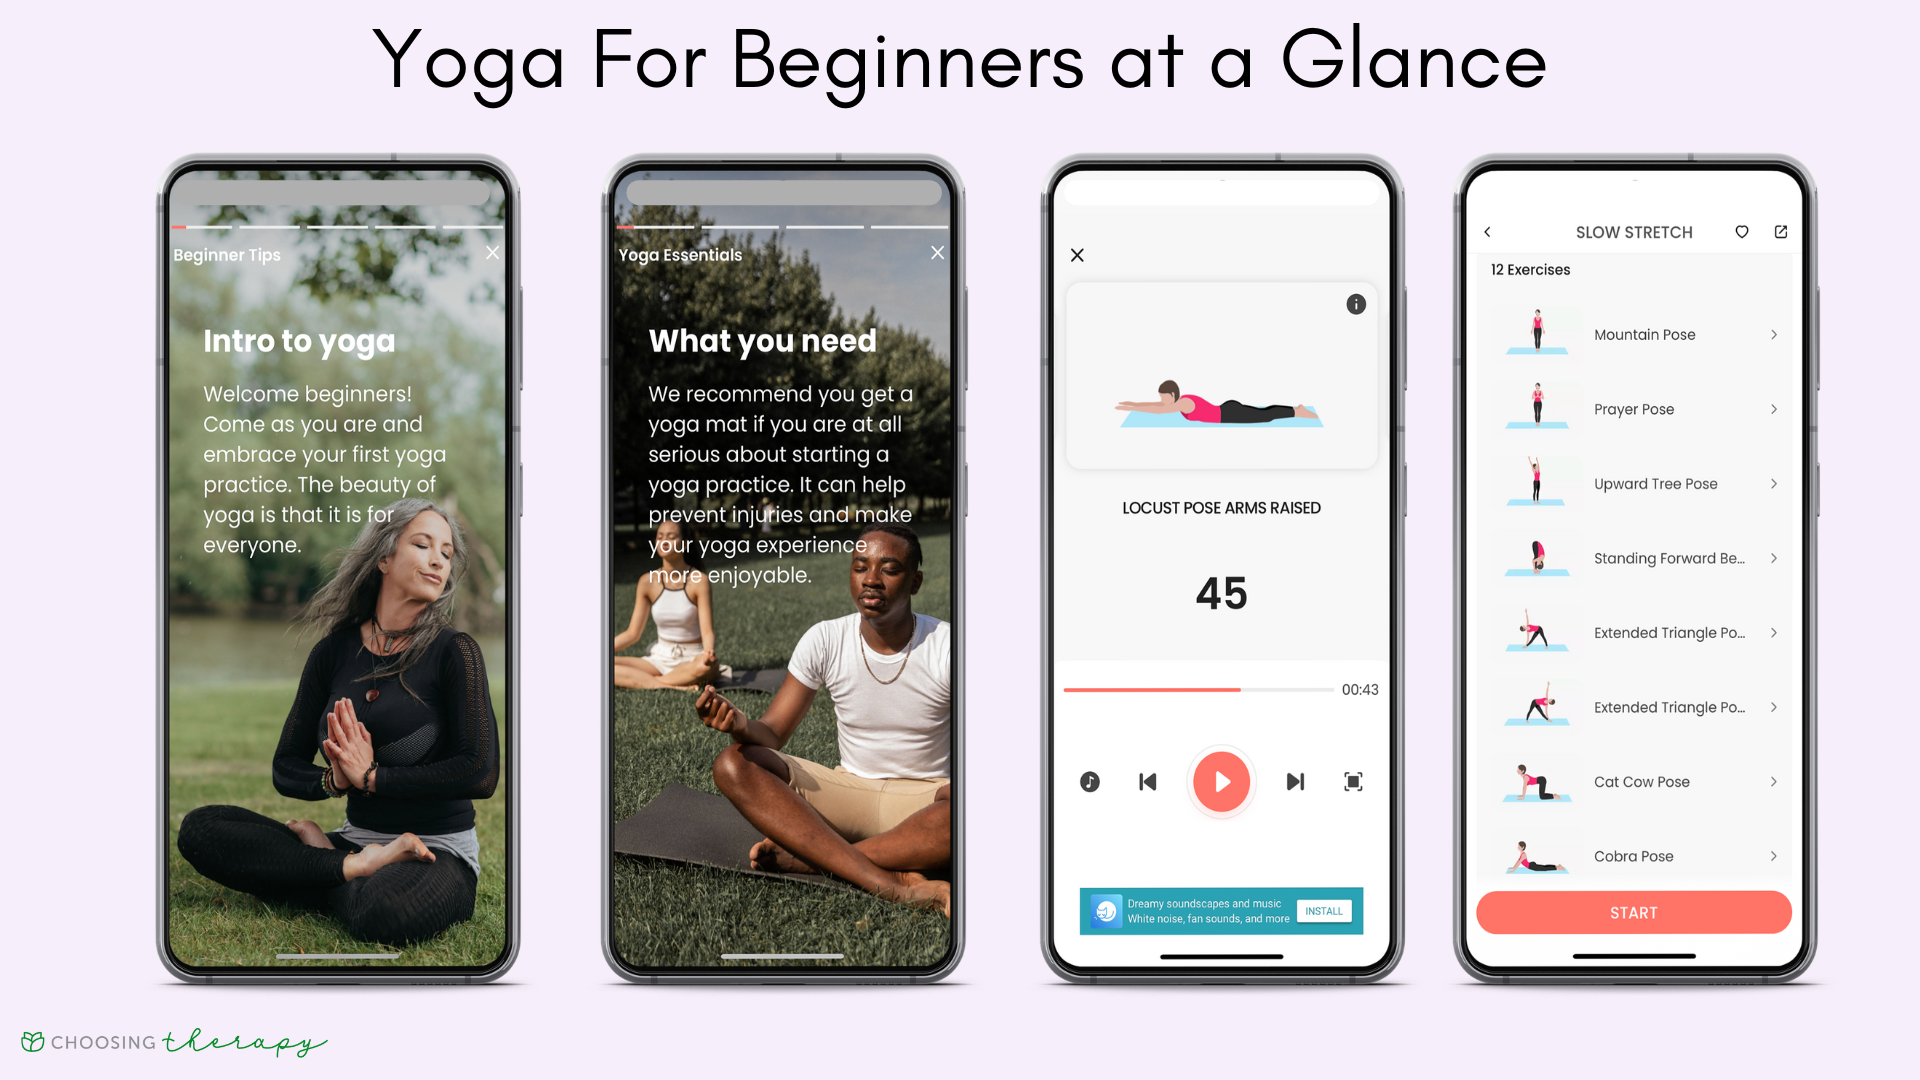 Four images of the key features of Yoga for Beginners app